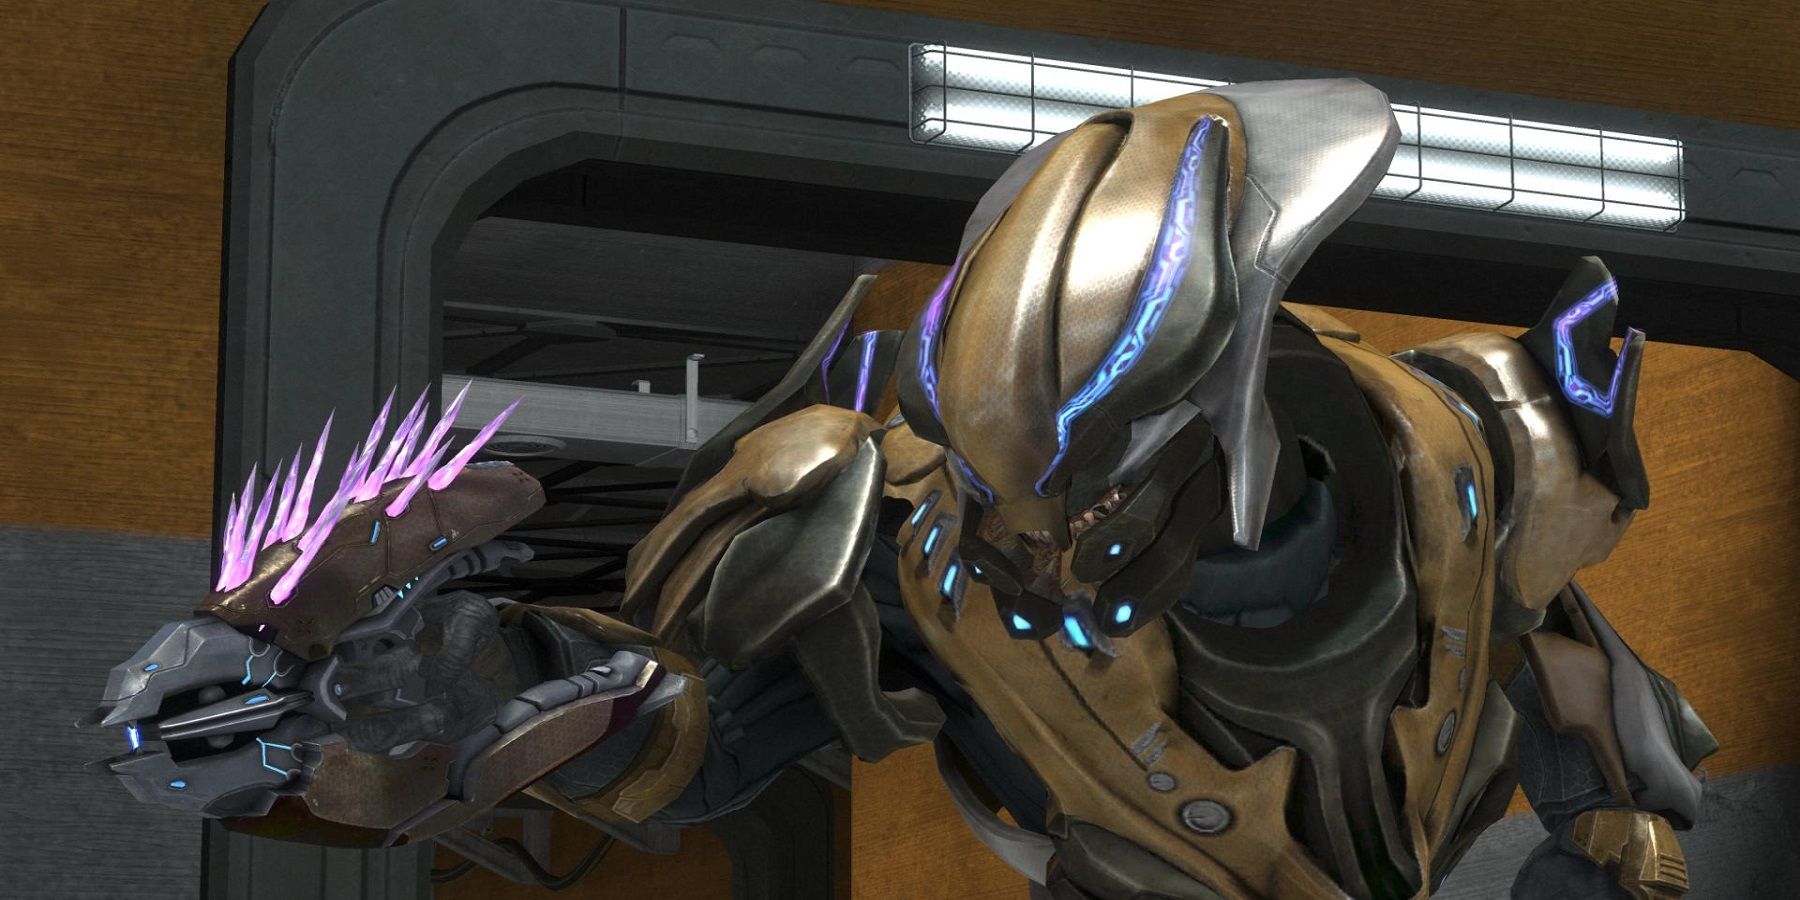 A Halo Reach got a painful reminder of how strong Elites are in the game's campaign.